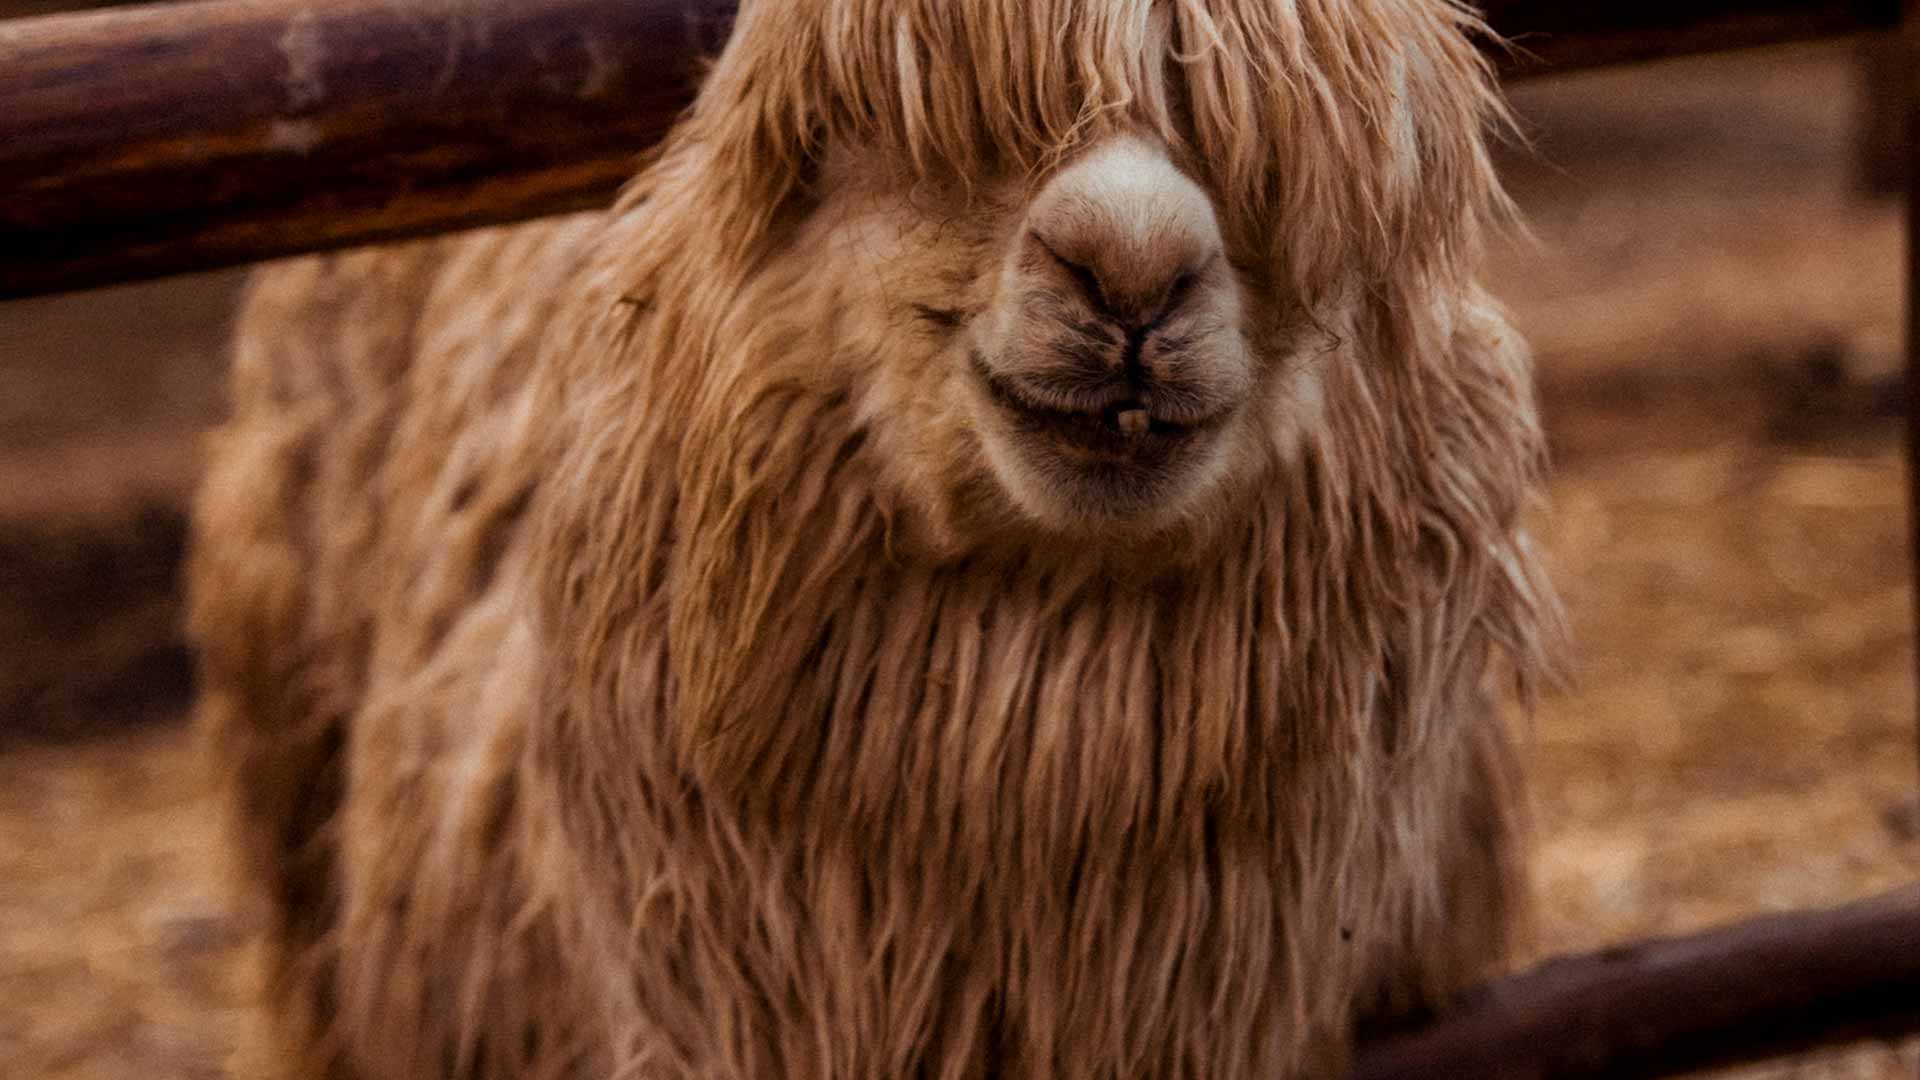 An alpaca looks at the camera with its head through two wooden palings in a fence to illustrate what the other side of COVID-19 looks like in the community sector